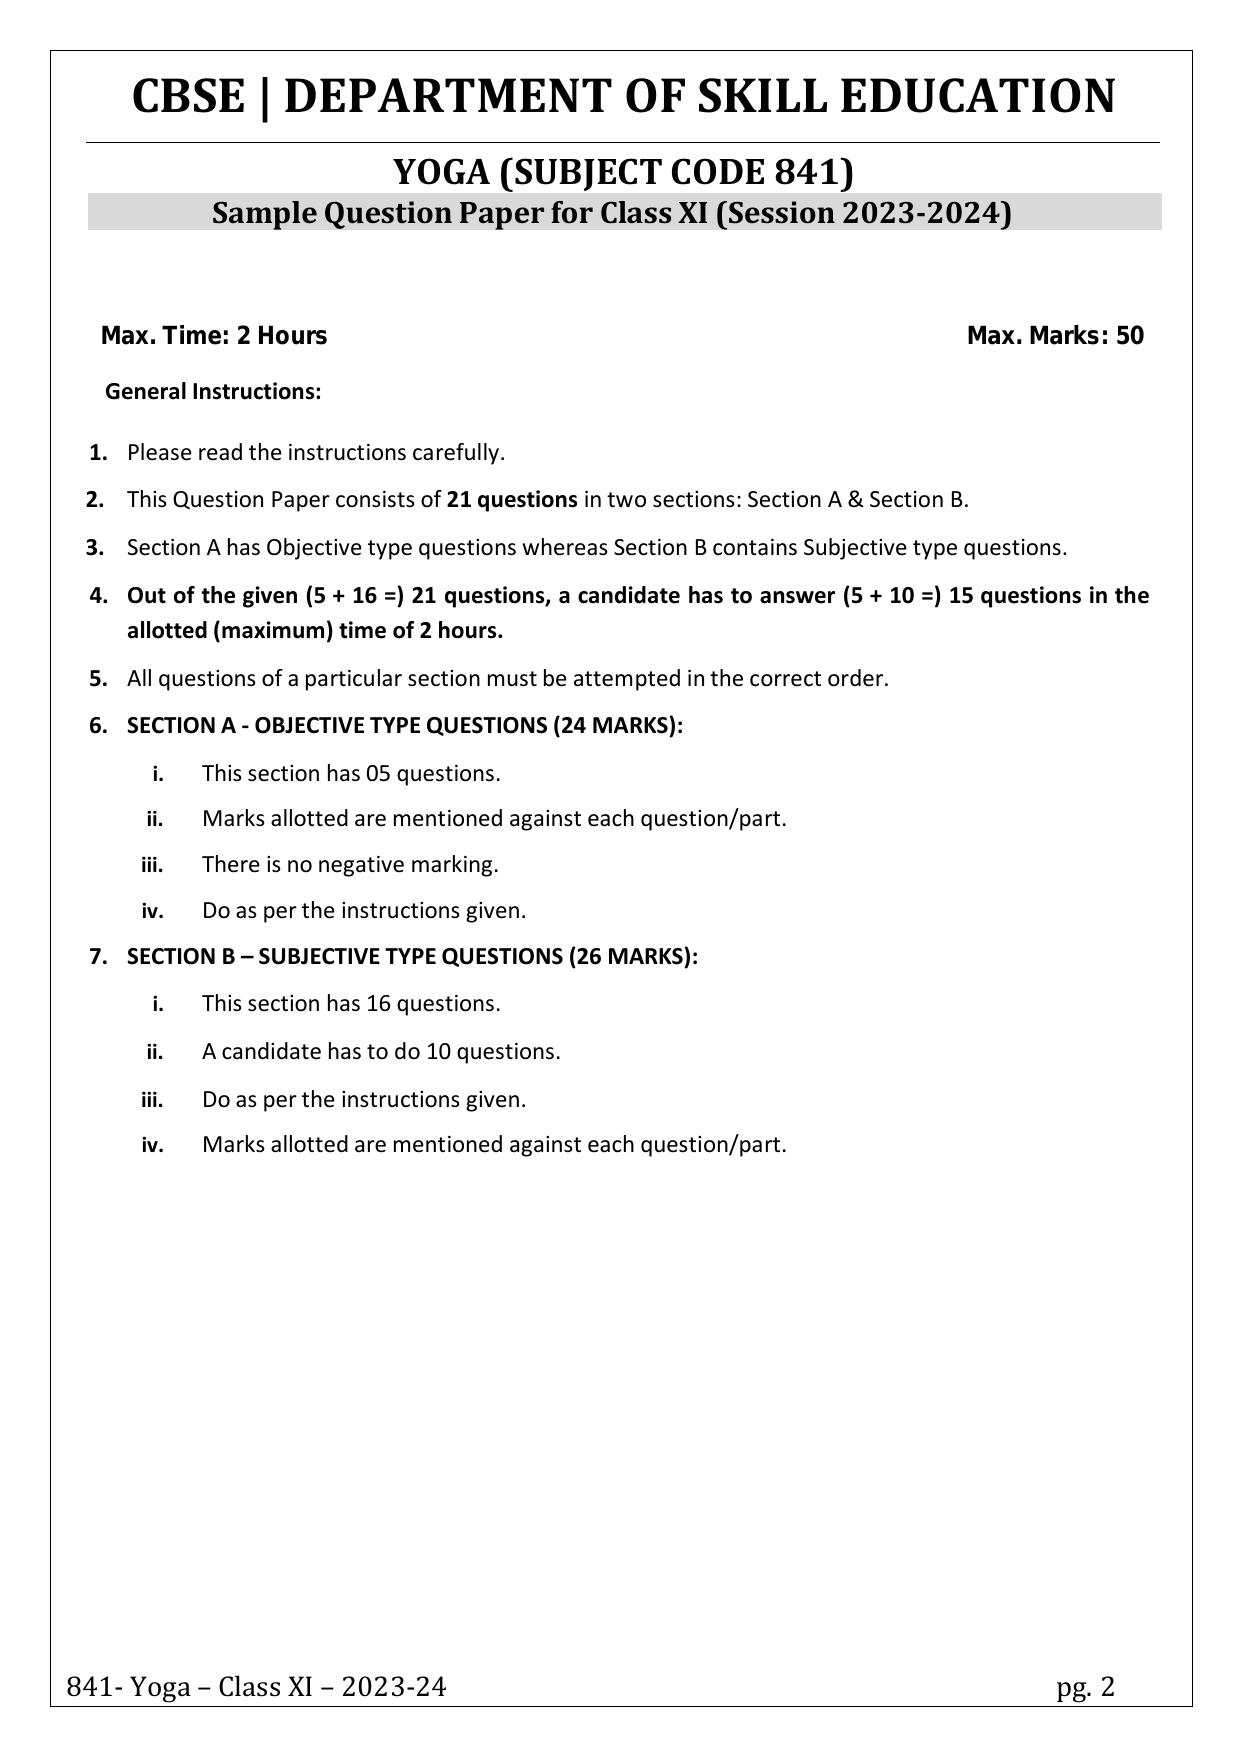 CBSE Class 11: Yoga 2024 Sample Paper - Page 2